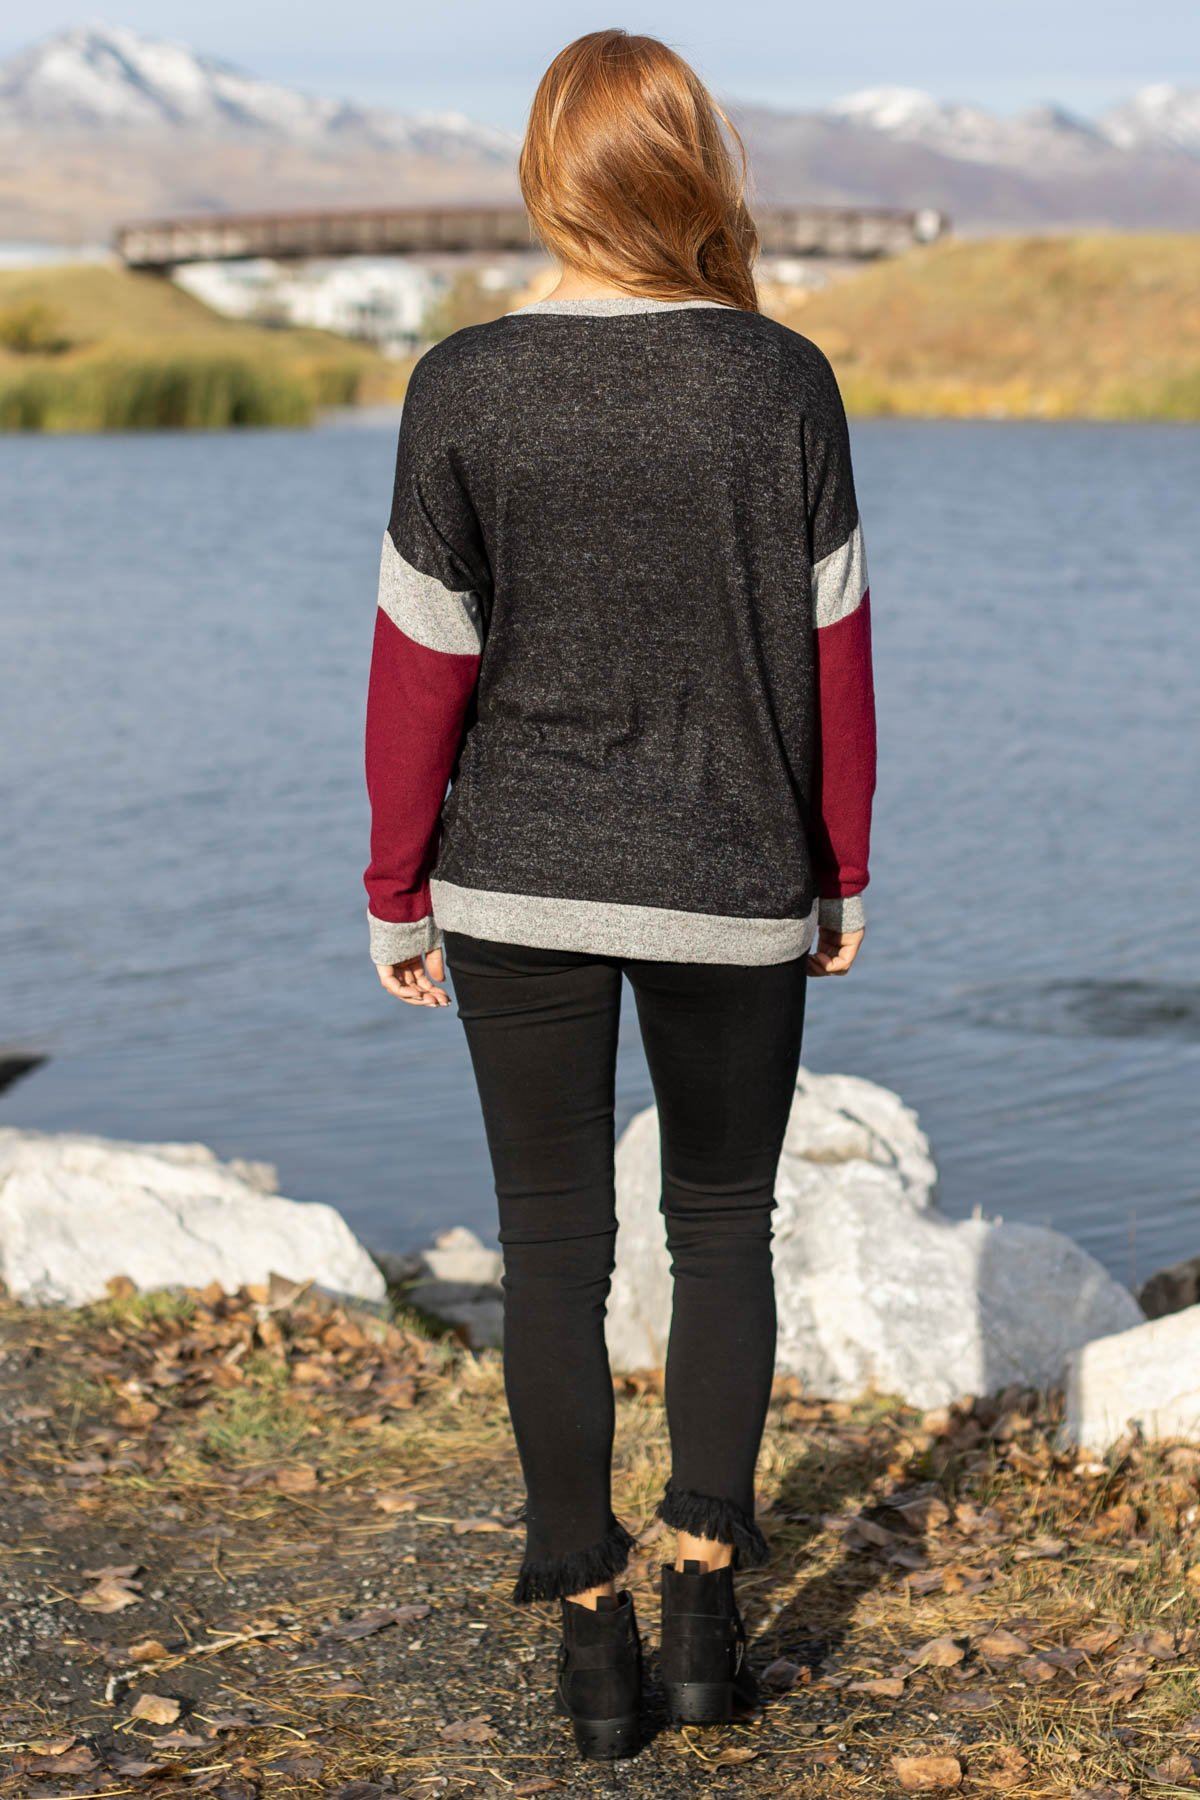 Charcoal and Burgundy Colorblock Top - Filly Flair